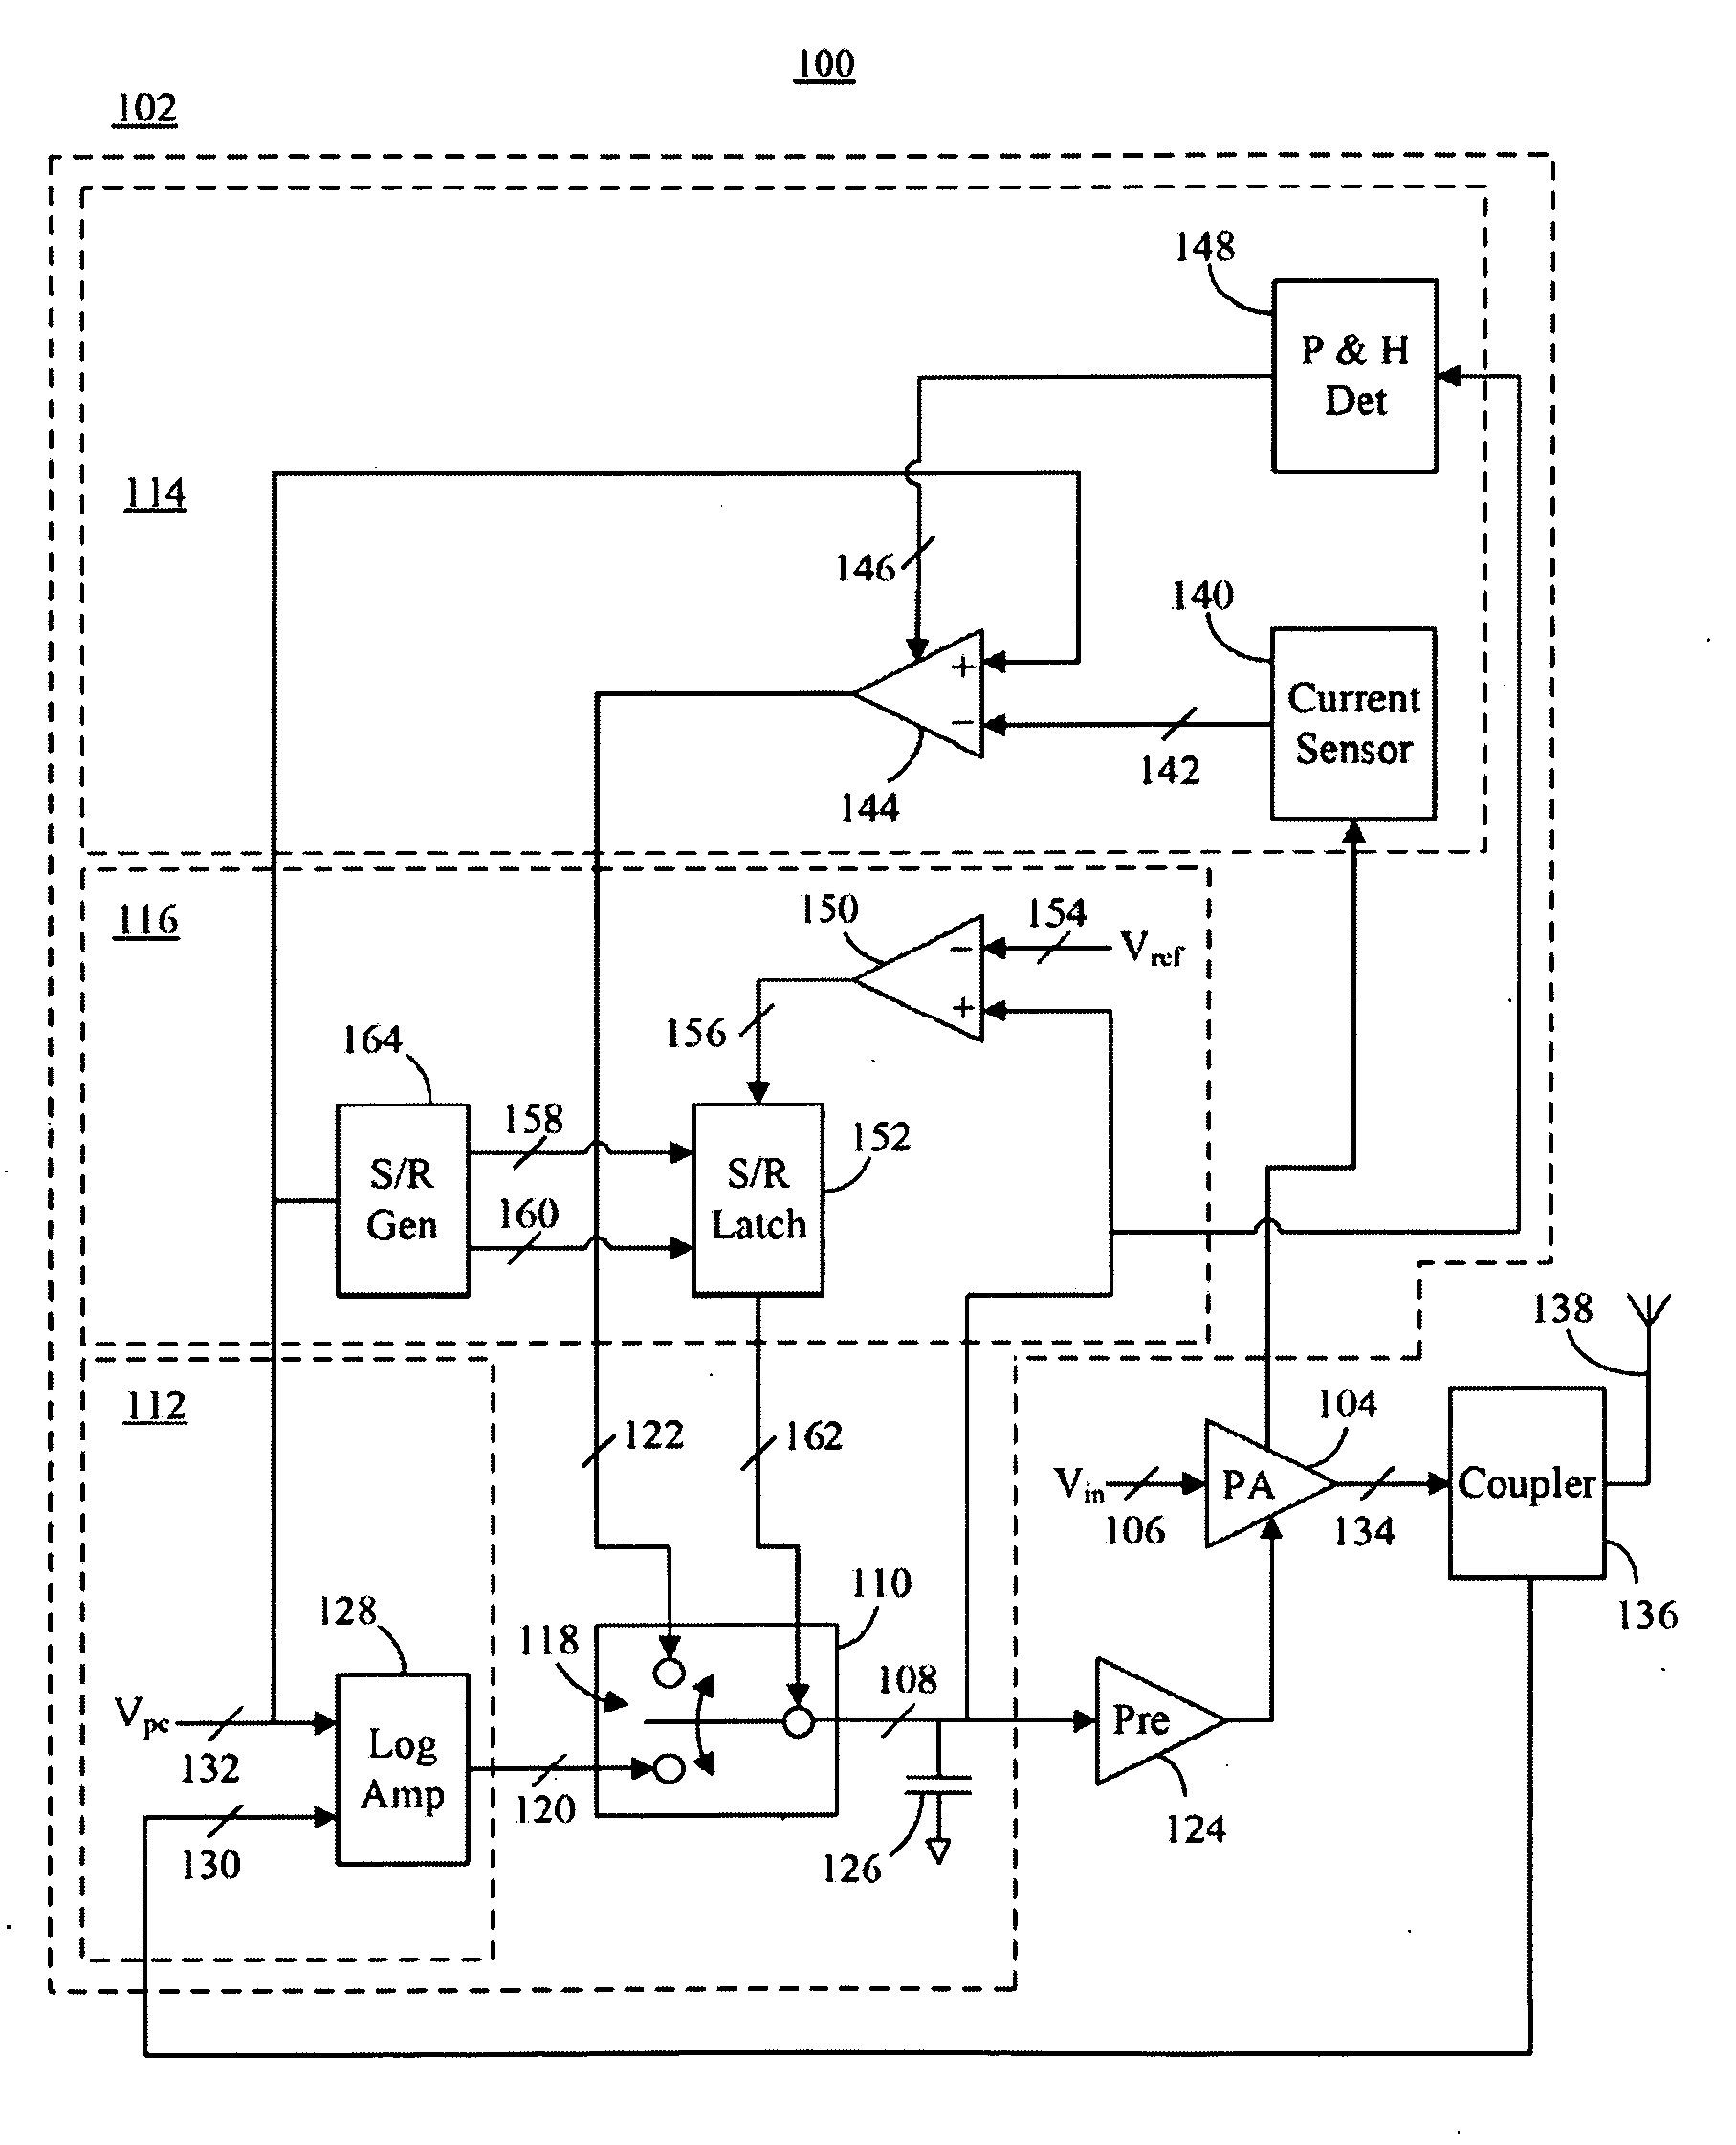 Hybrid power control for a power amplifier